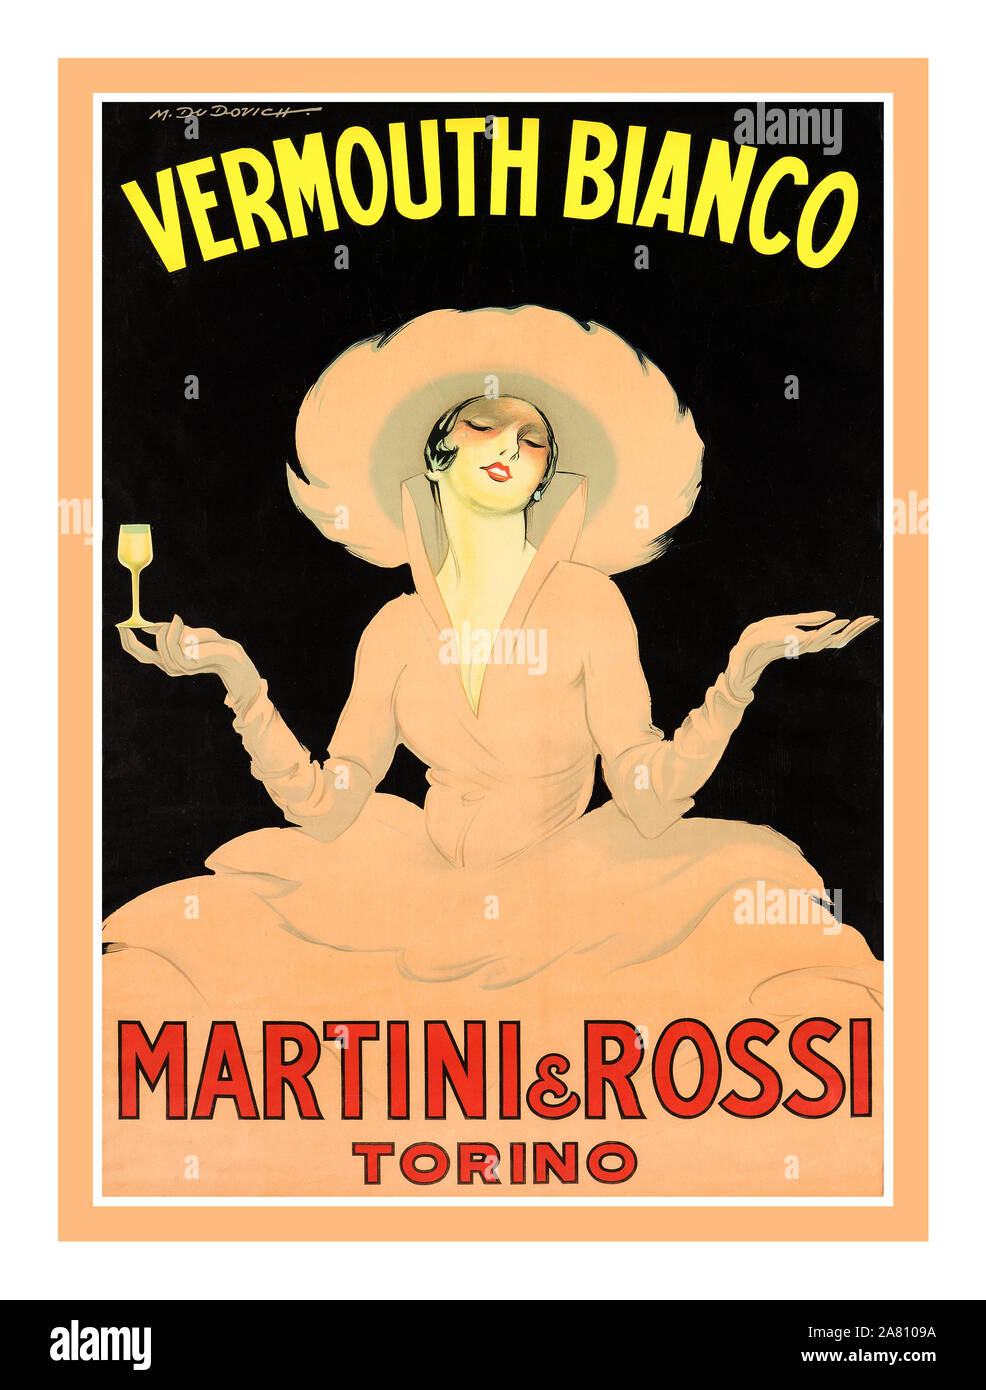 Vintage MARTINI 1950's Drinks Poster Vermouth Bianco stylish vintage poster Martini & Rosso Torino, Italy, 1959. Artist MARCELLO DUDOVICH,  lithograph Illustration Art Stock Photo